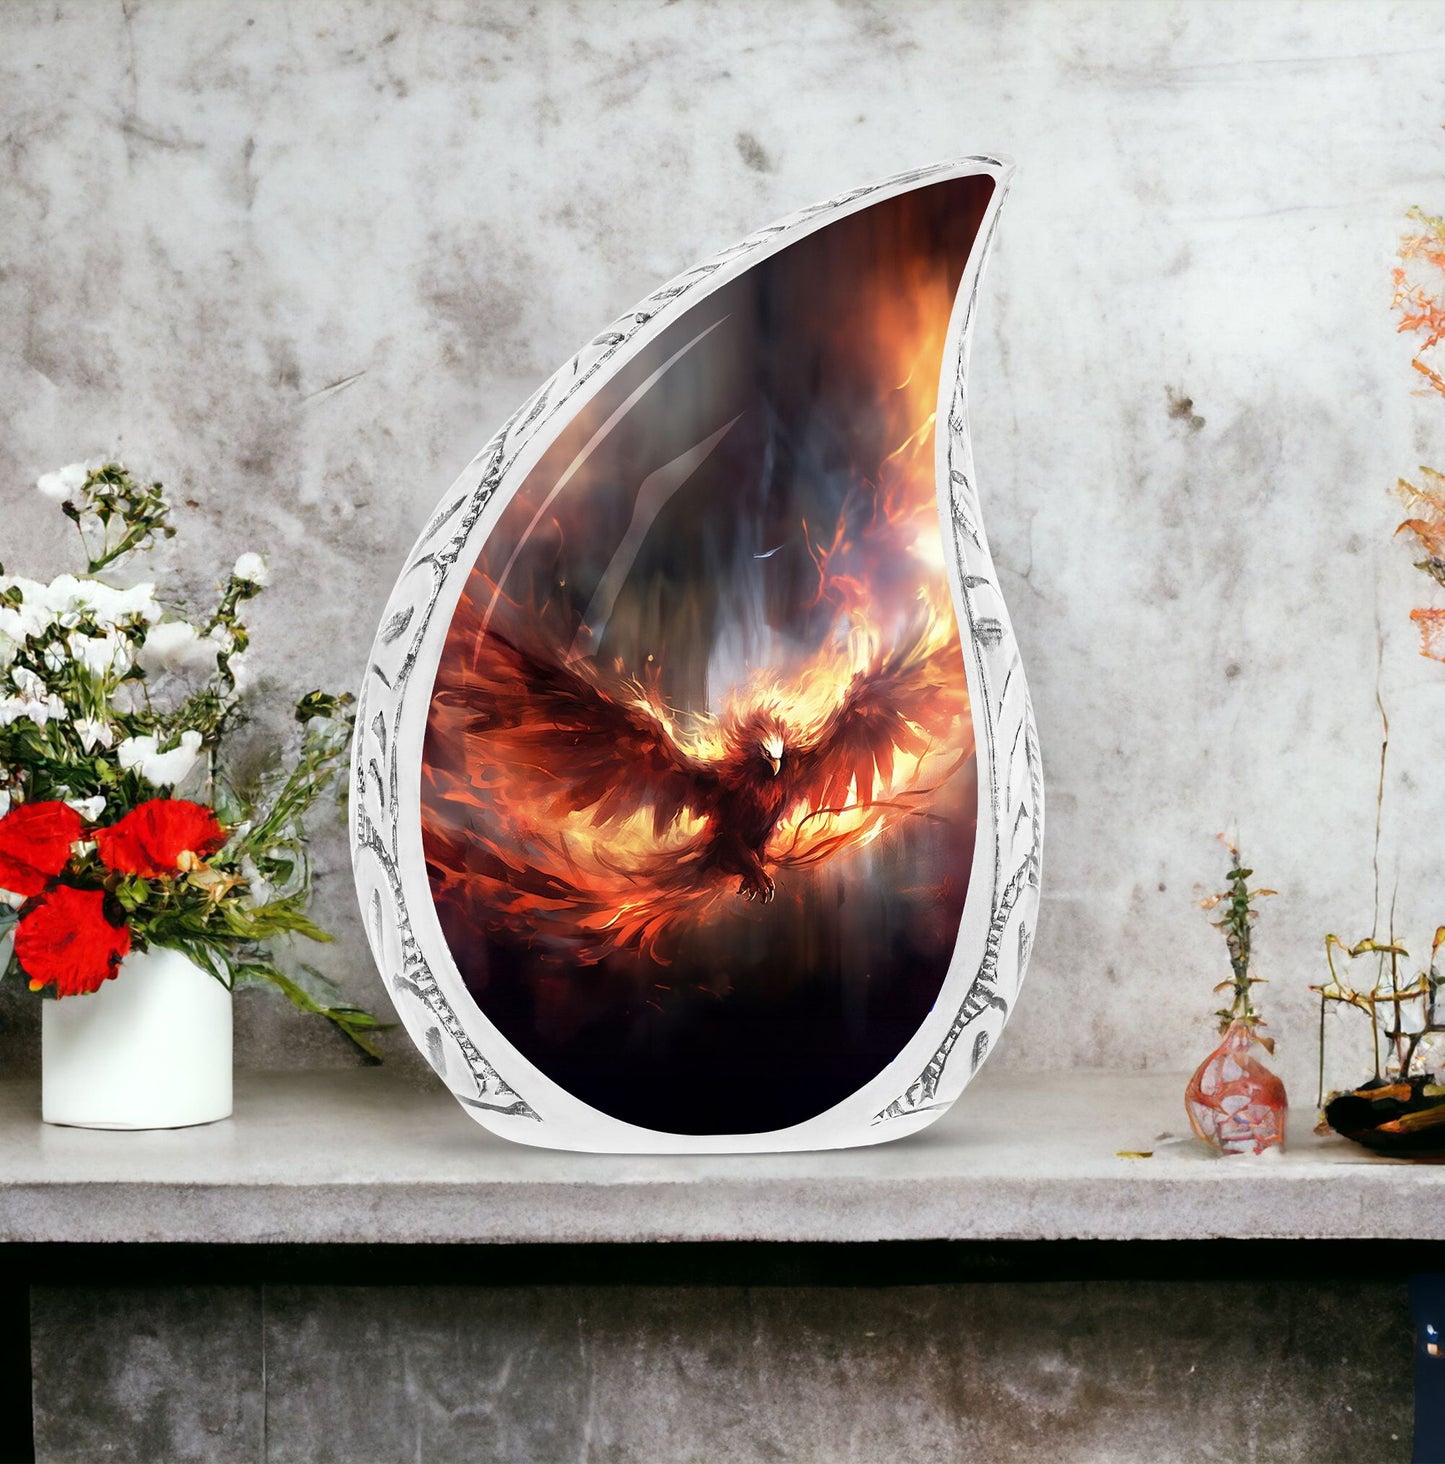 Large, unique Phoenix-themed urn for human ashes in fiery red color